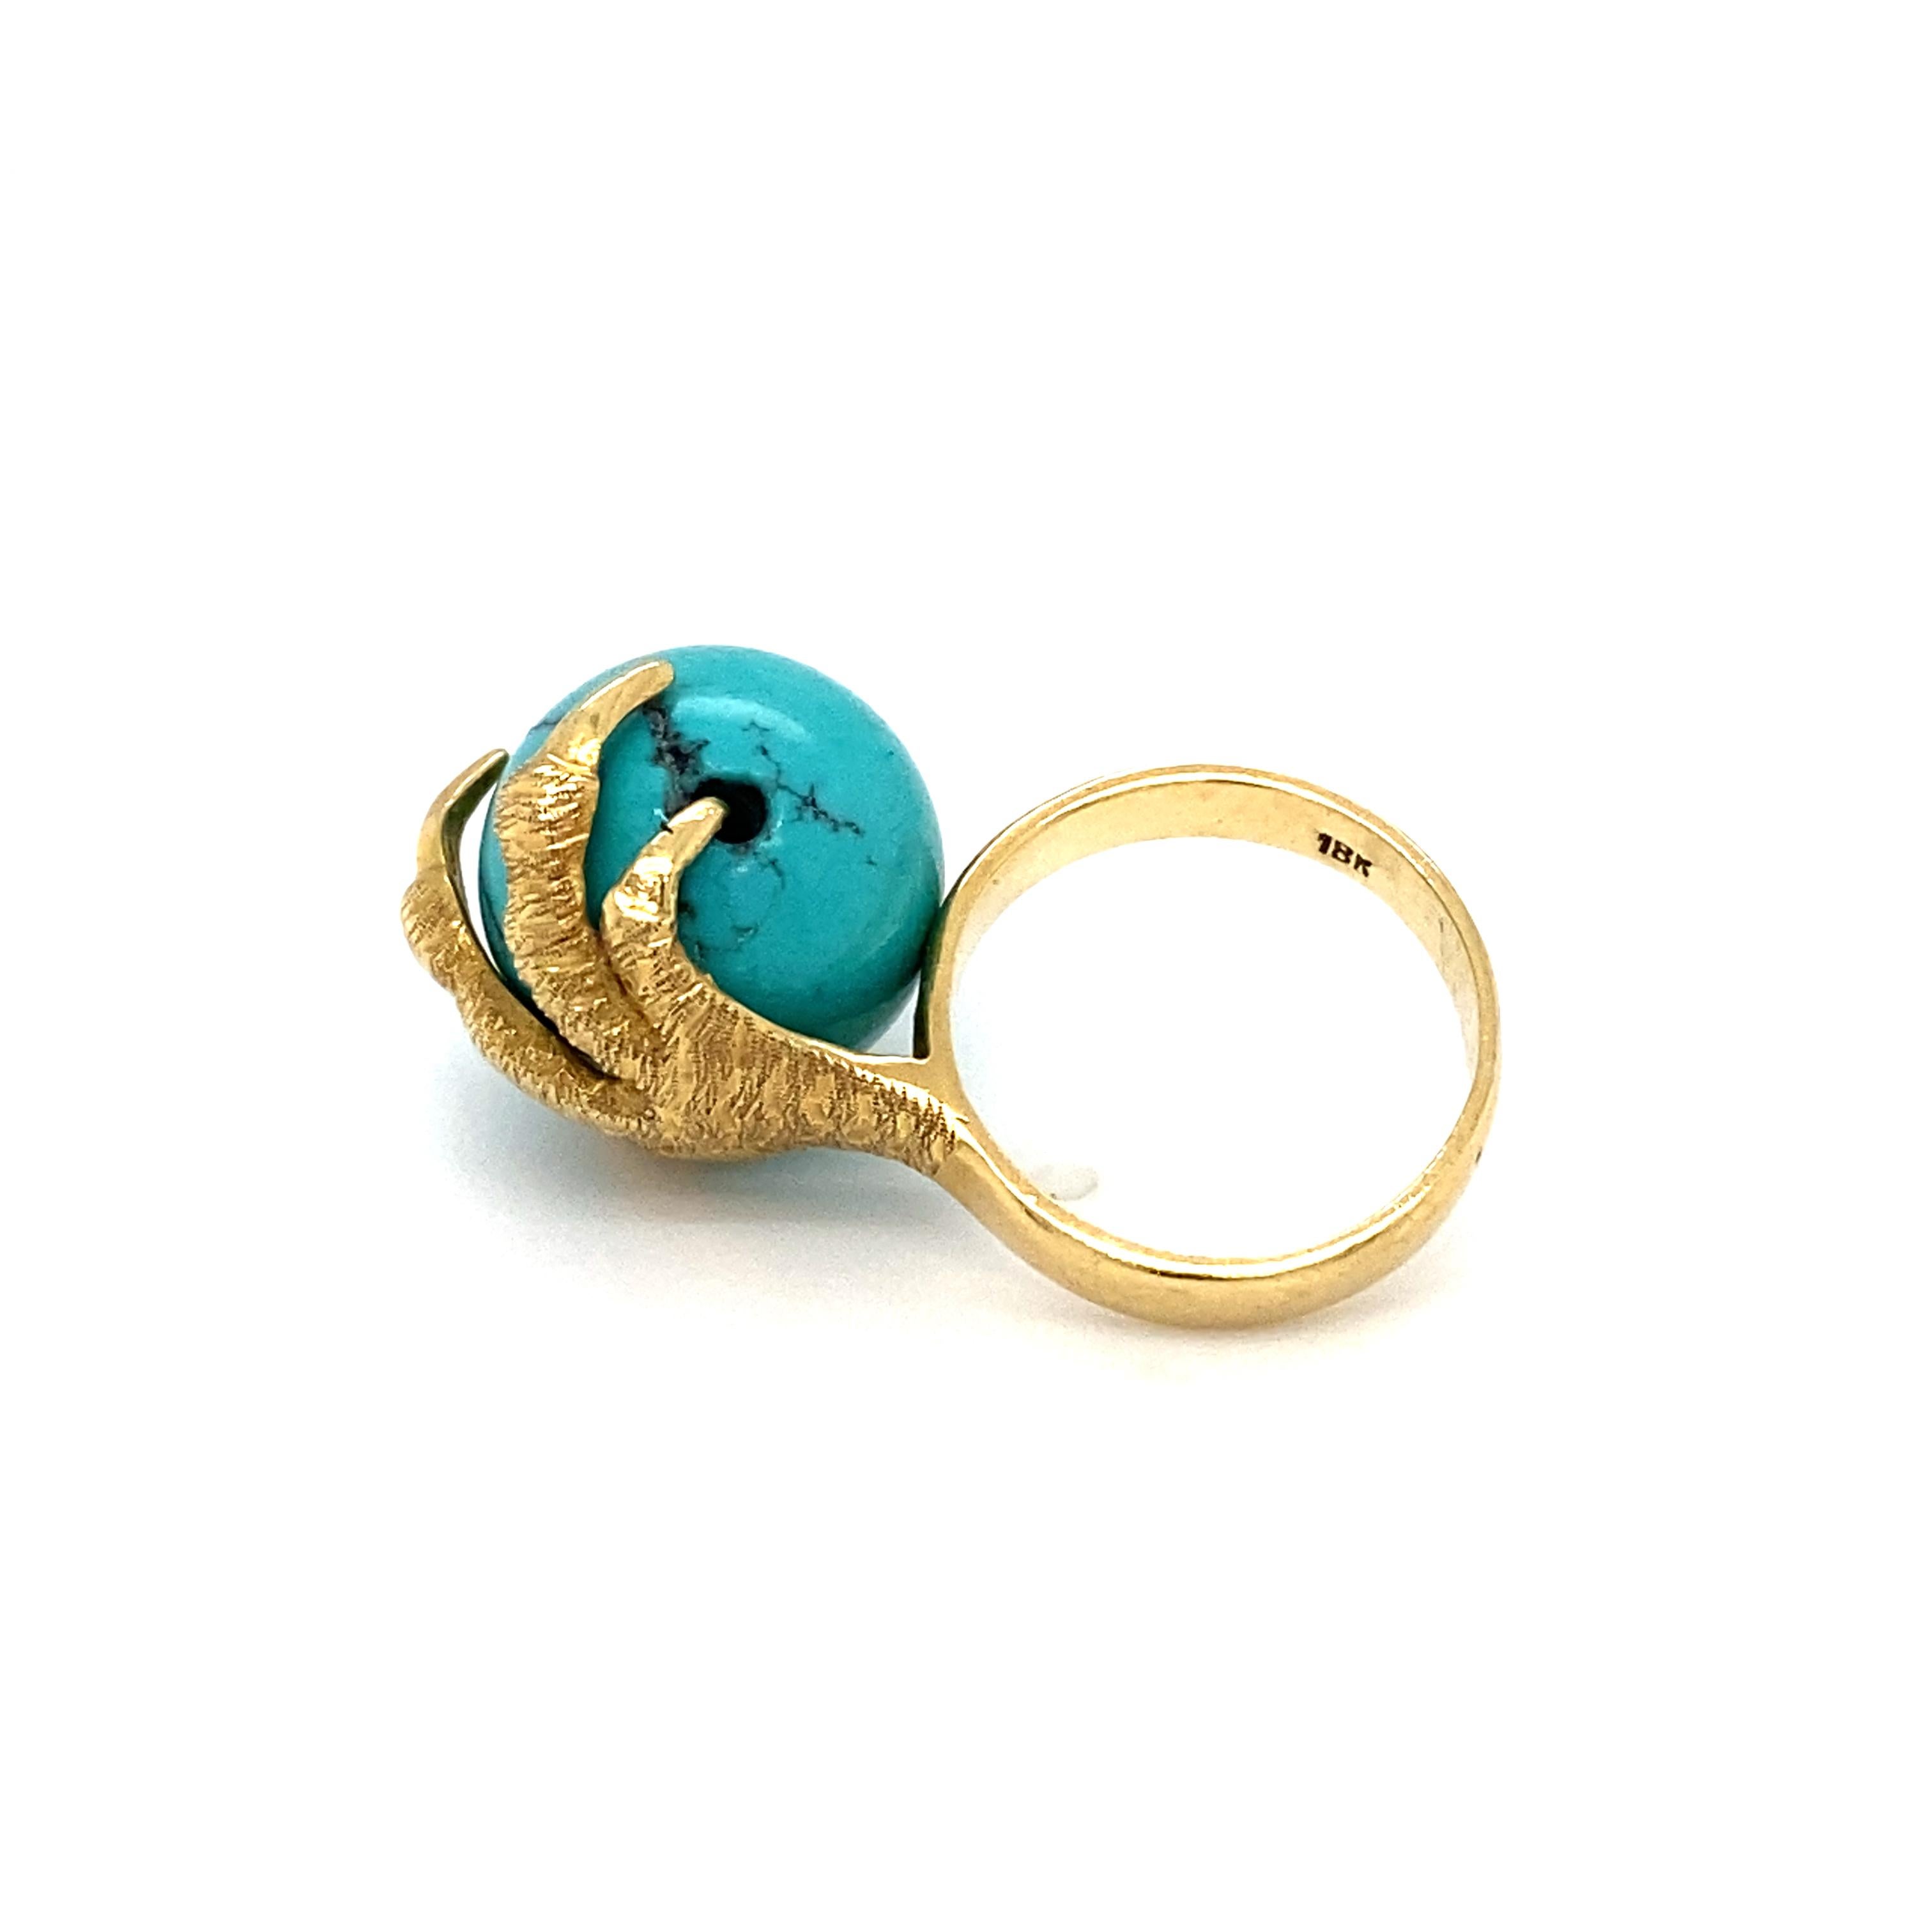 Circa 1970s Turquoise Bead and Claw Ring in 18 Karat Gold  For Sale 3